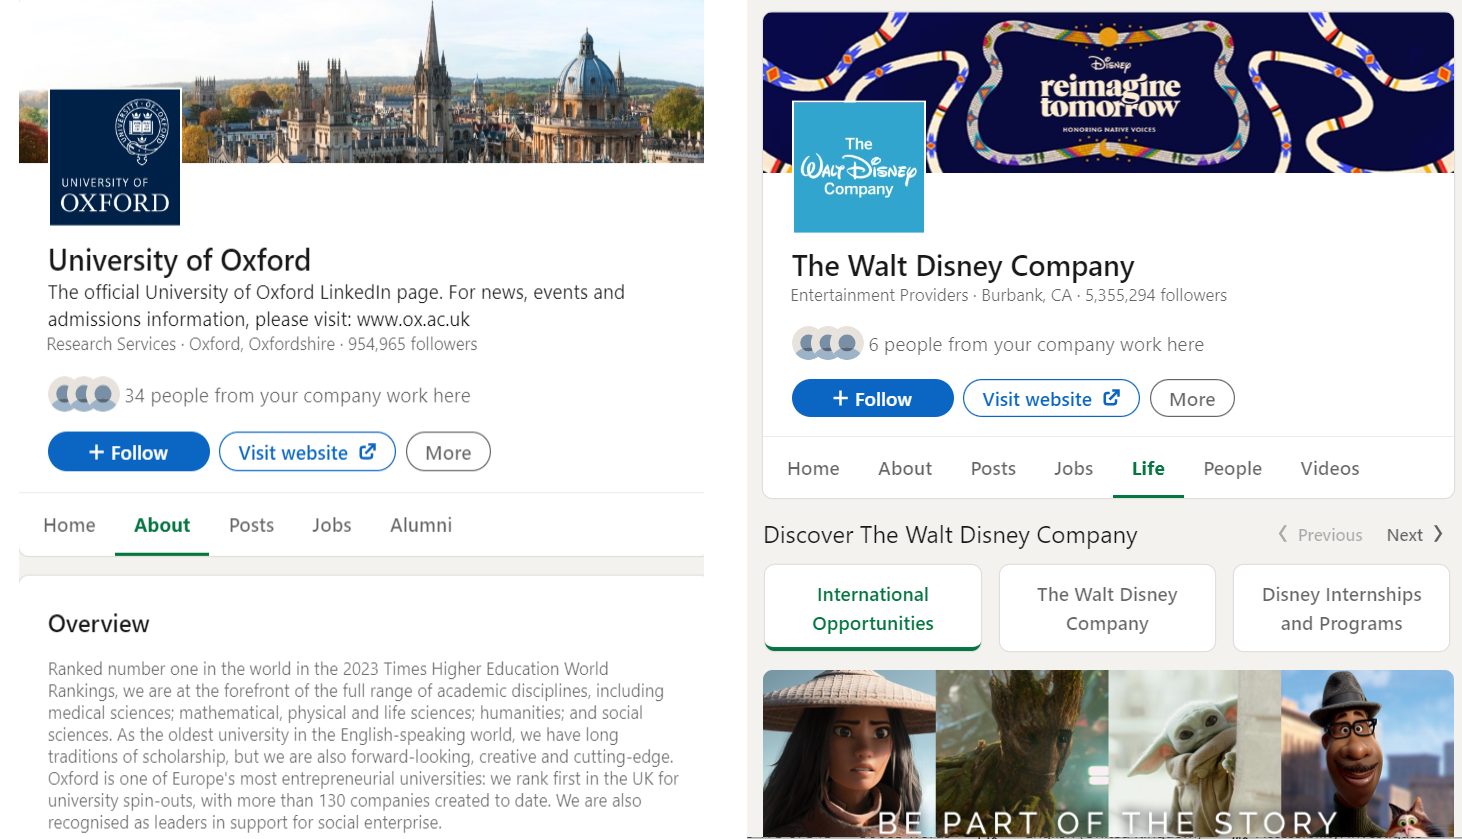 LinkedIn Company Pages — University of Oxford (About page) and The Walt Disney Company (Life page).